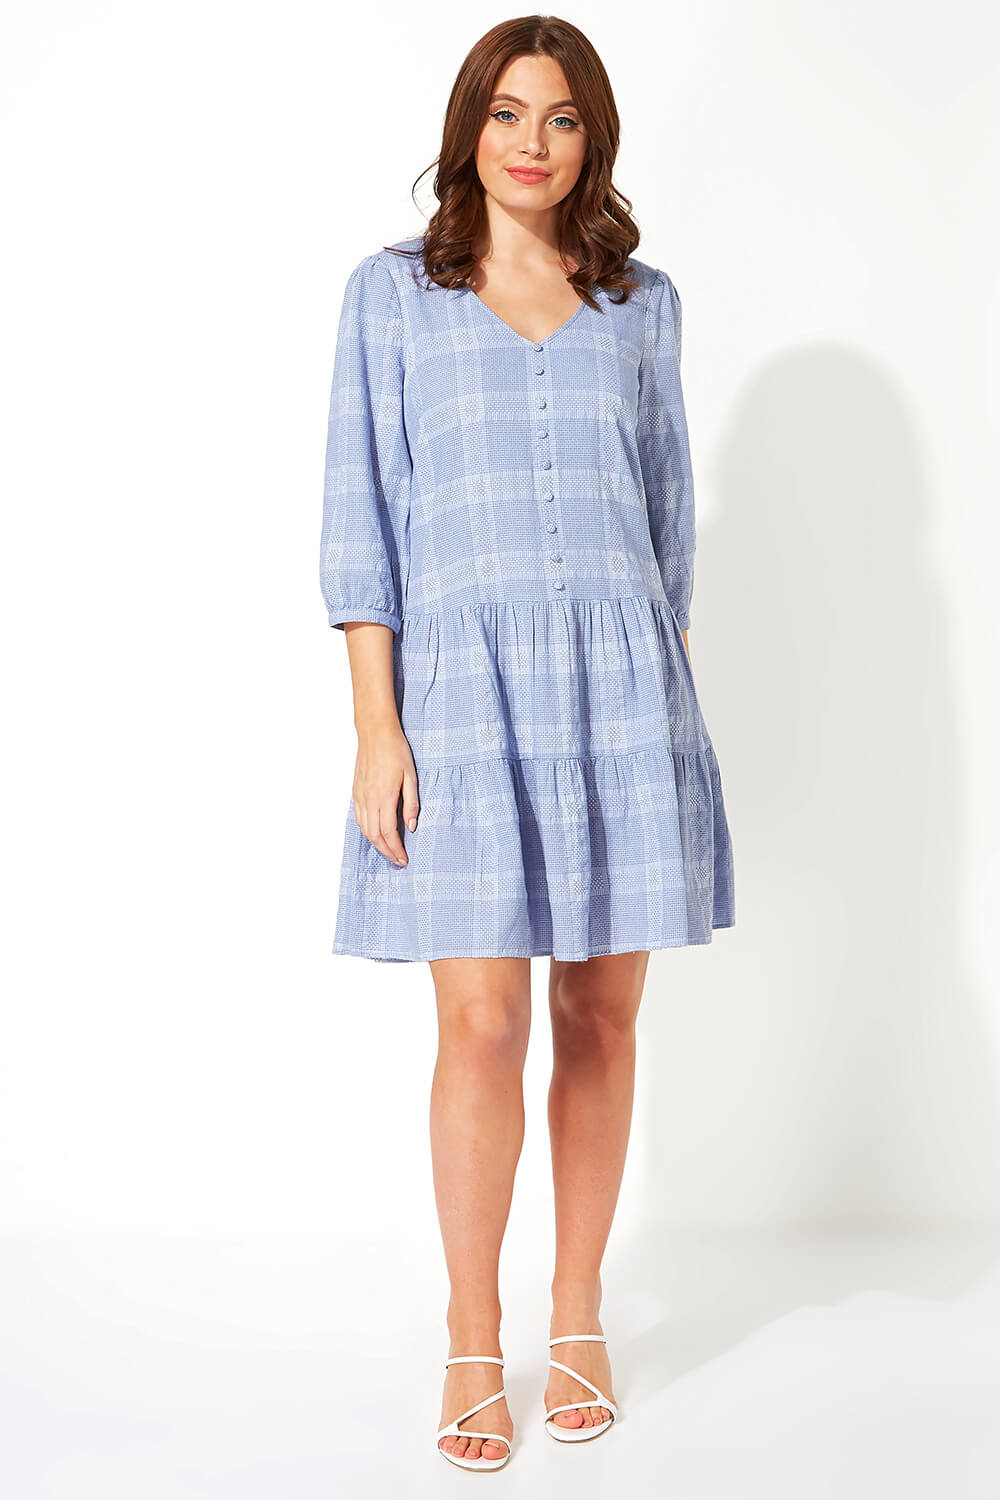 Blue Check Tiered Swing Dress, Image 2 of 5